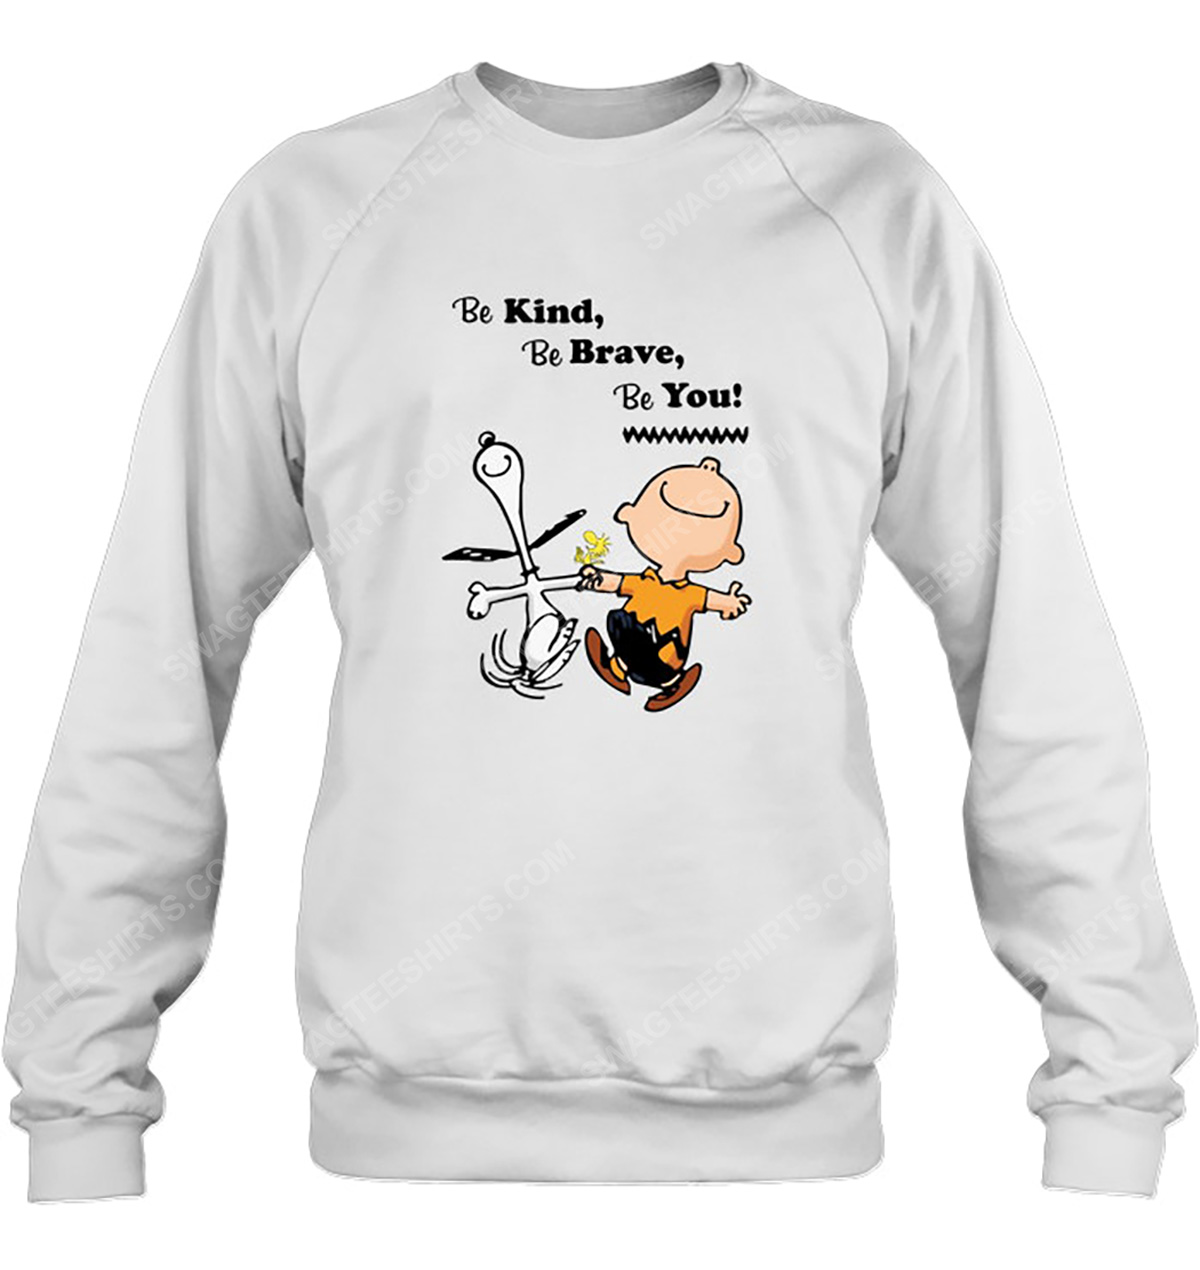 Charlie brown and snoopy be kind be brave be you sweatshirt 1